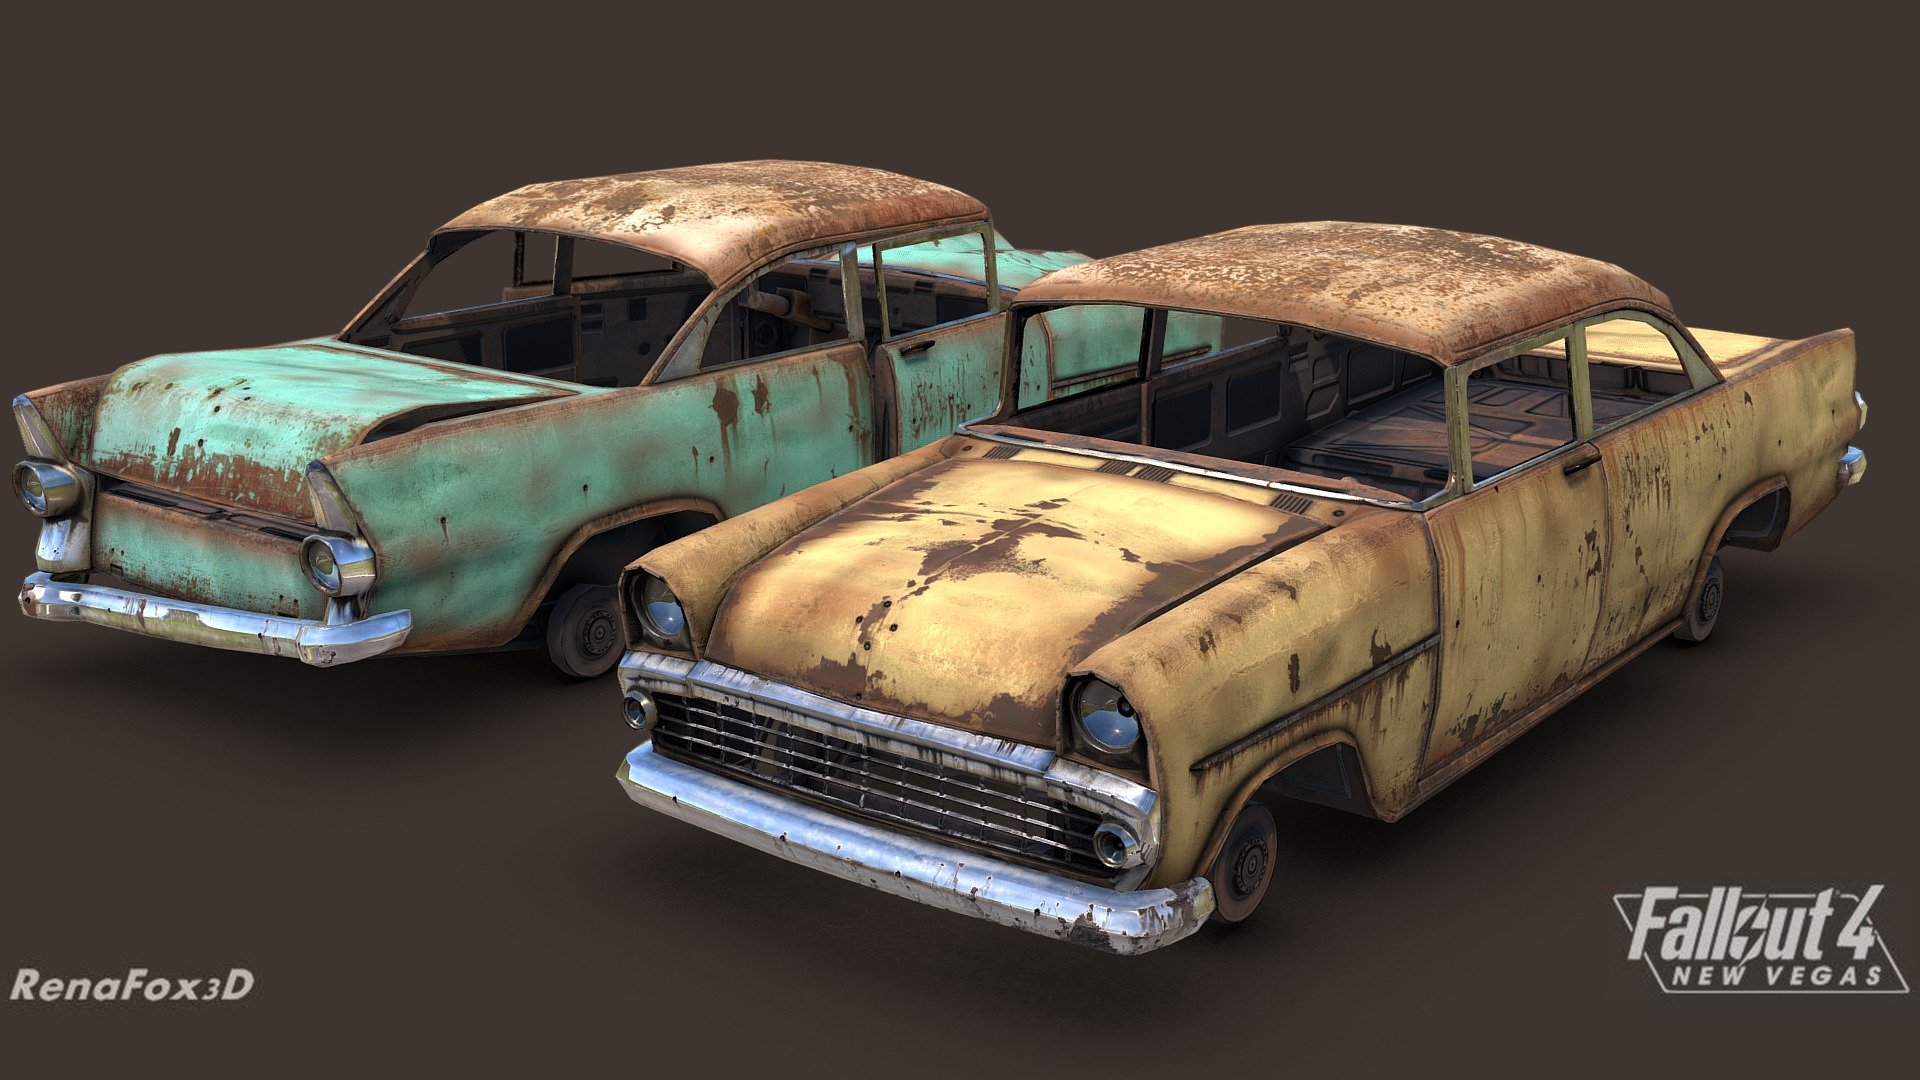 A modular car/coupe model for the Fallout 4: New Vegas project, we plan on replacing most of the vanilla Fallout 4 vehicles with custom ones that better match New Vegas’ art direction.

Made in 3DSMax and Substance Painter 3d model